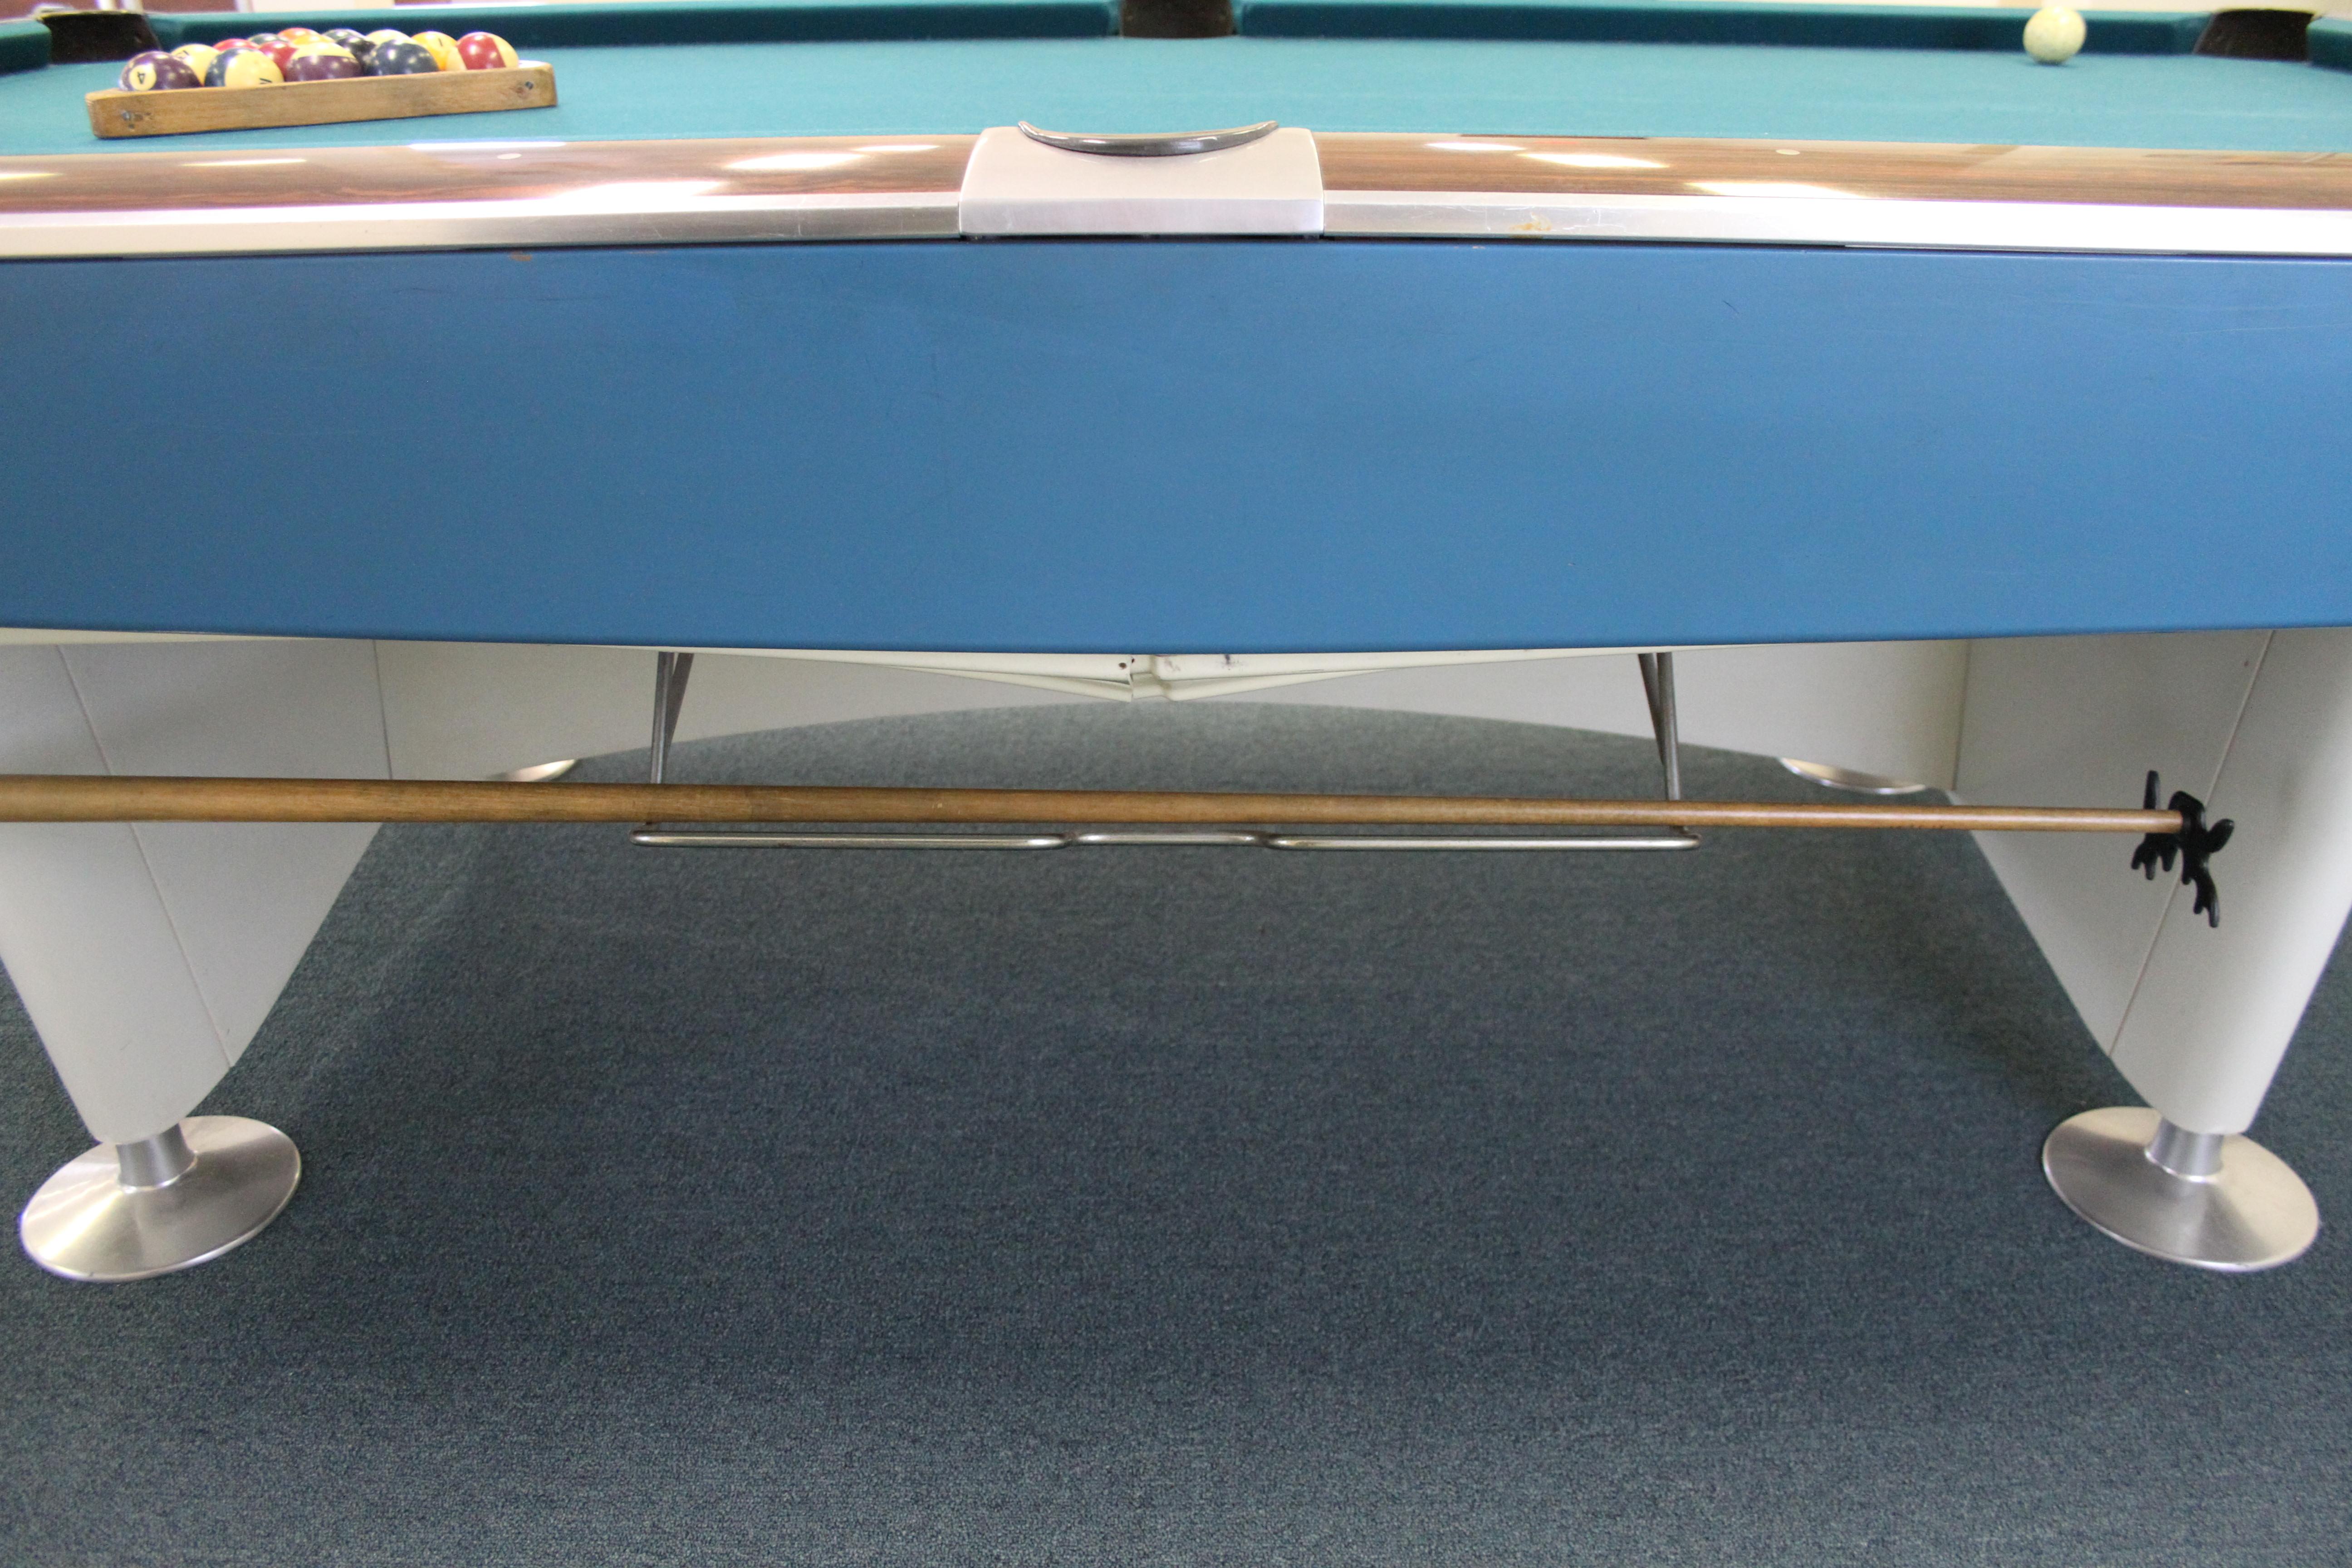 Aluminum Mid-Century Modern Brunswick Gold Crown I Billiards Pool Table with Blue Aprons